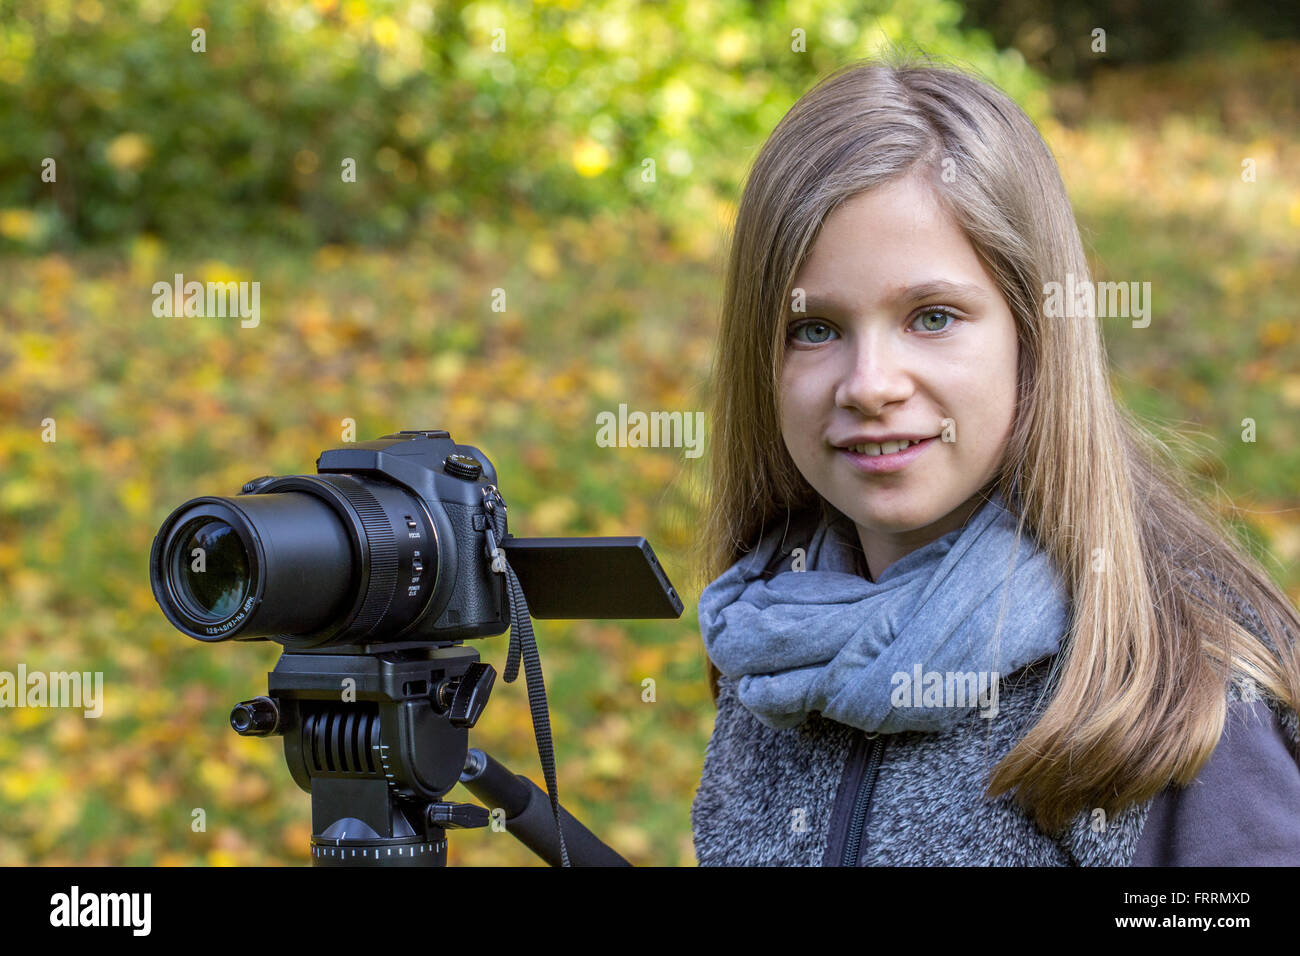 Young girl with a camera on a tripod Stock Photo